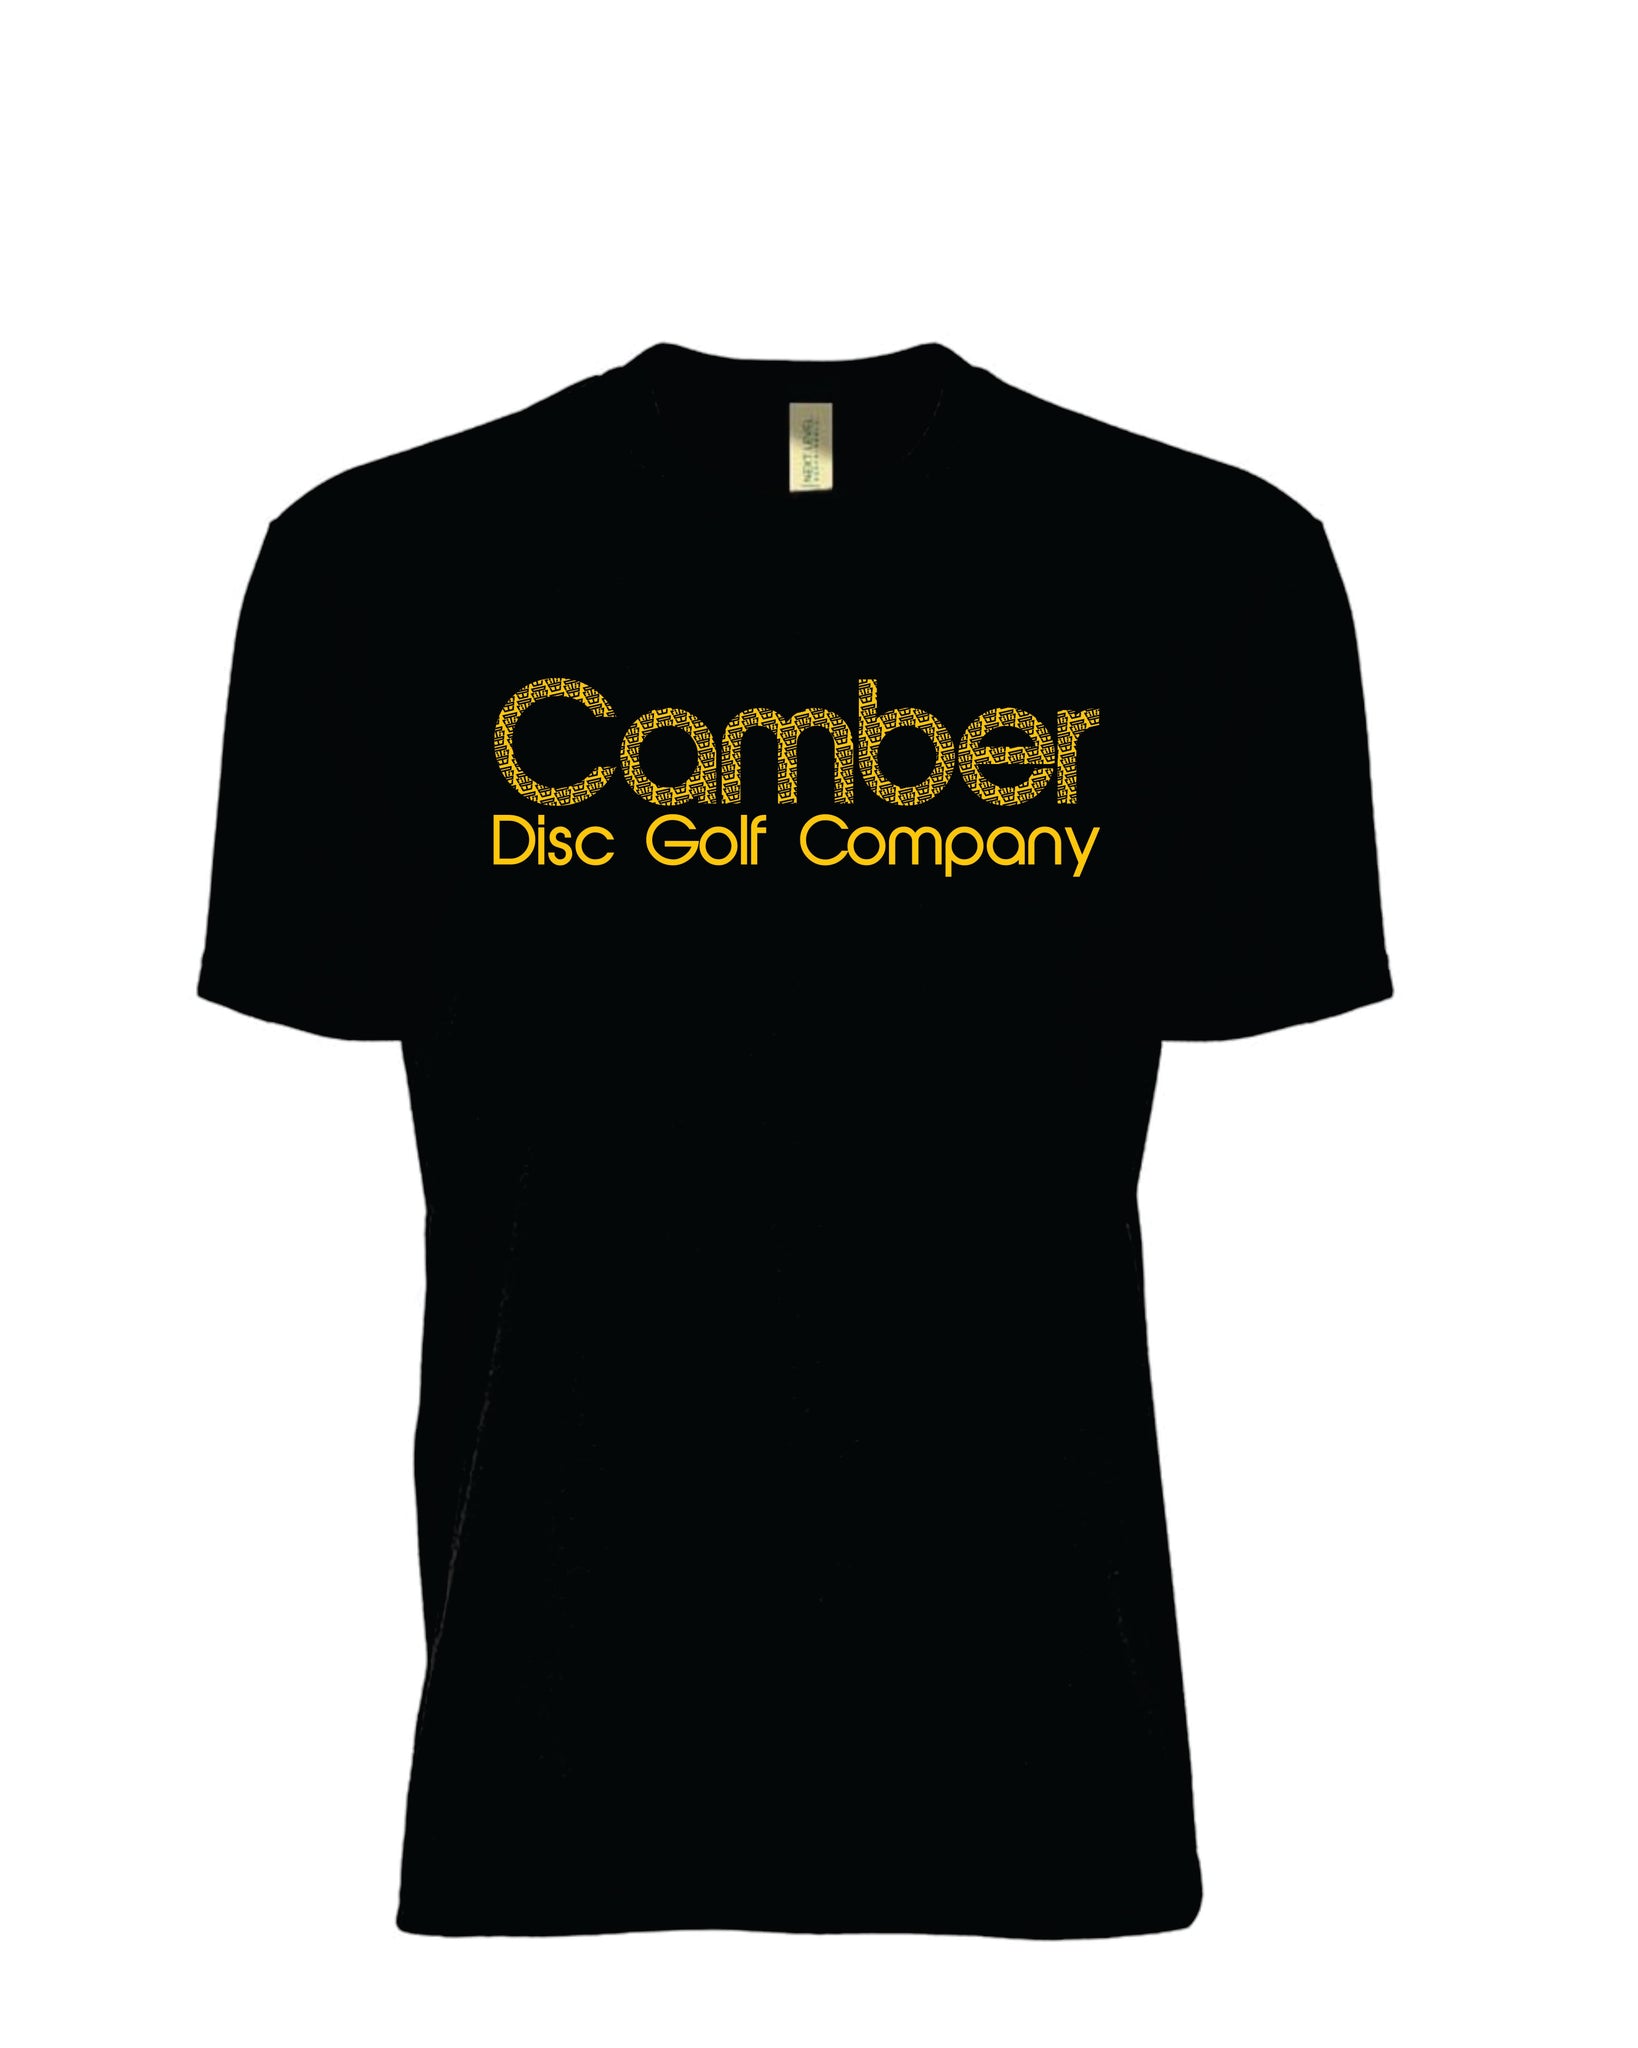 Camber Jersey- Black and Gold – Camber Disc Golf Company